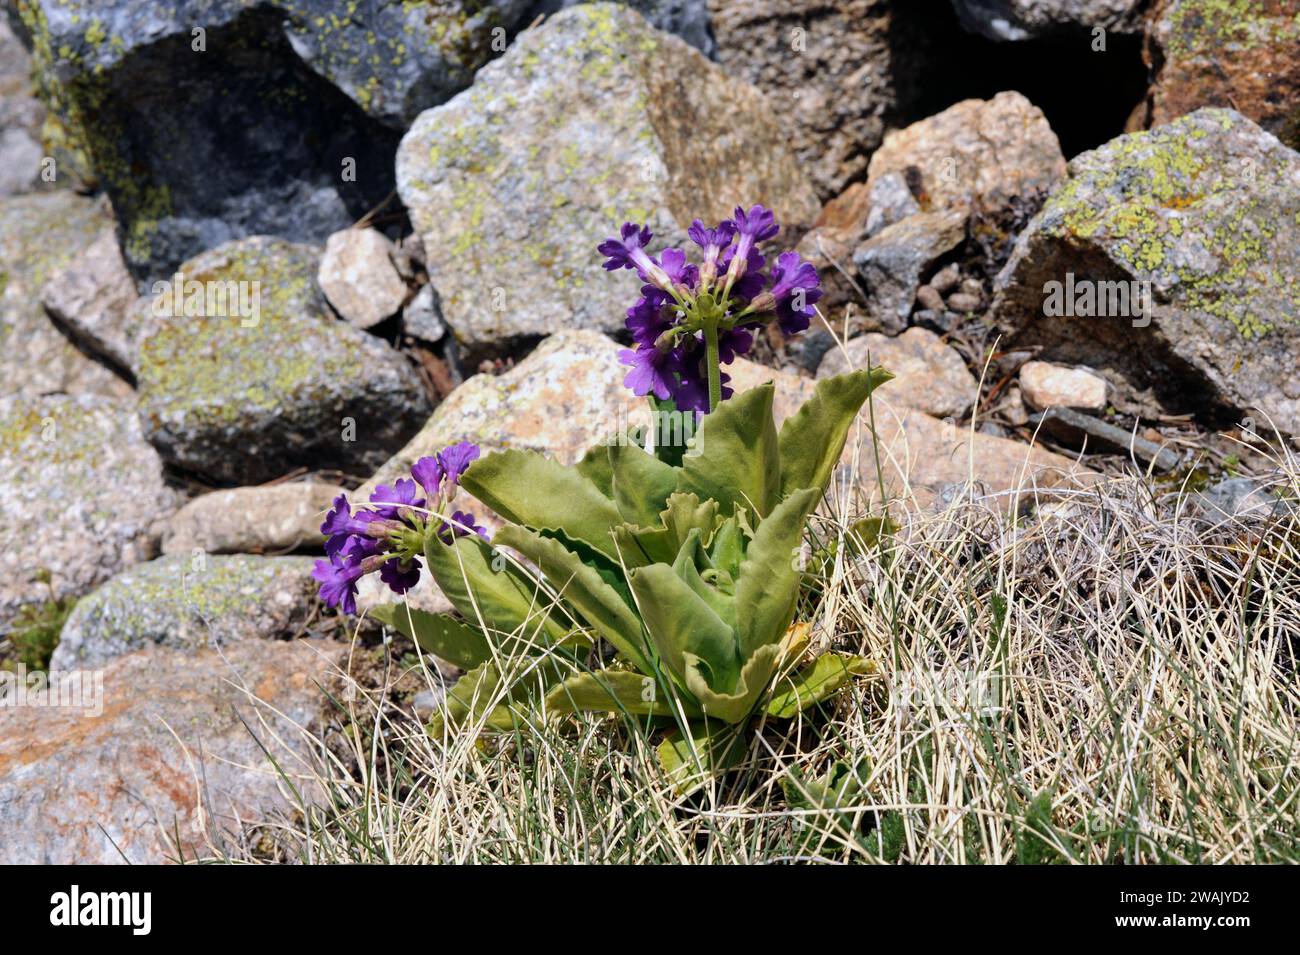 Primula integrifolia is a perennial herb native to Pyrenees, Cantabrian mountains and Alps. This photo was taken in Valle de Aran, Lleida province, Ca Stock Photo